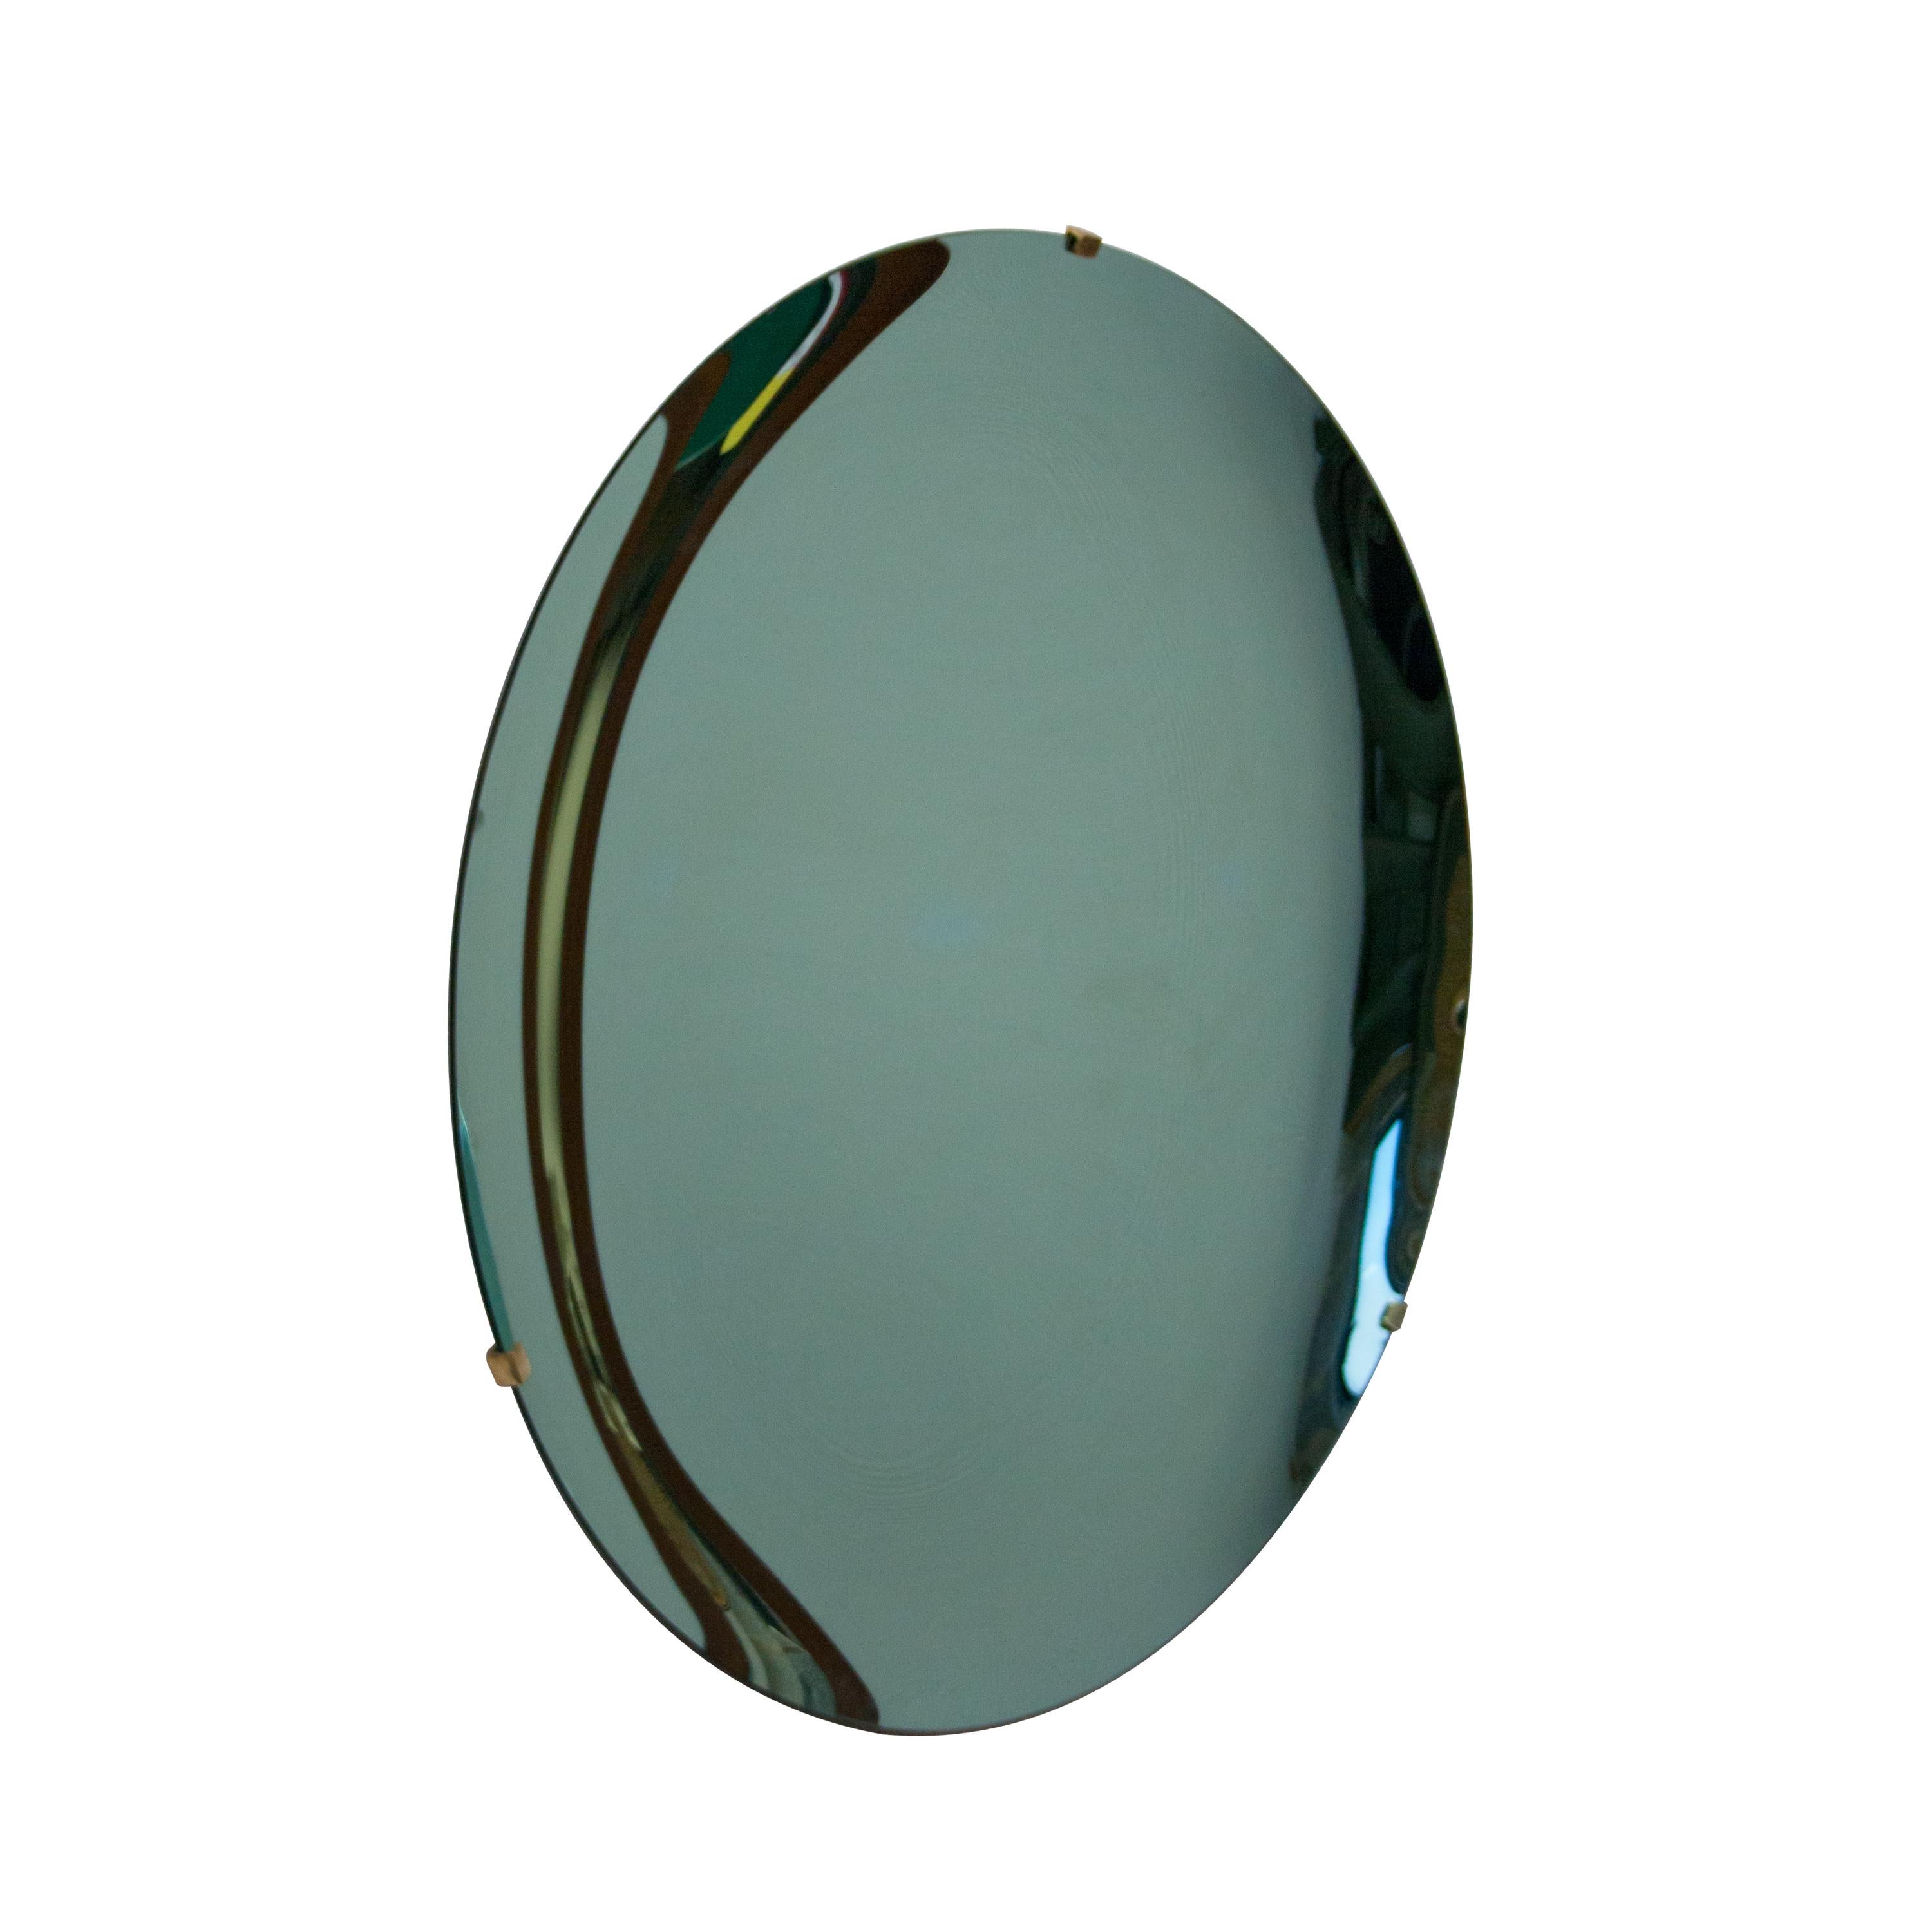 Hand-crafted green murano glass concave mirror. With brass back structure for hanging on the wall.